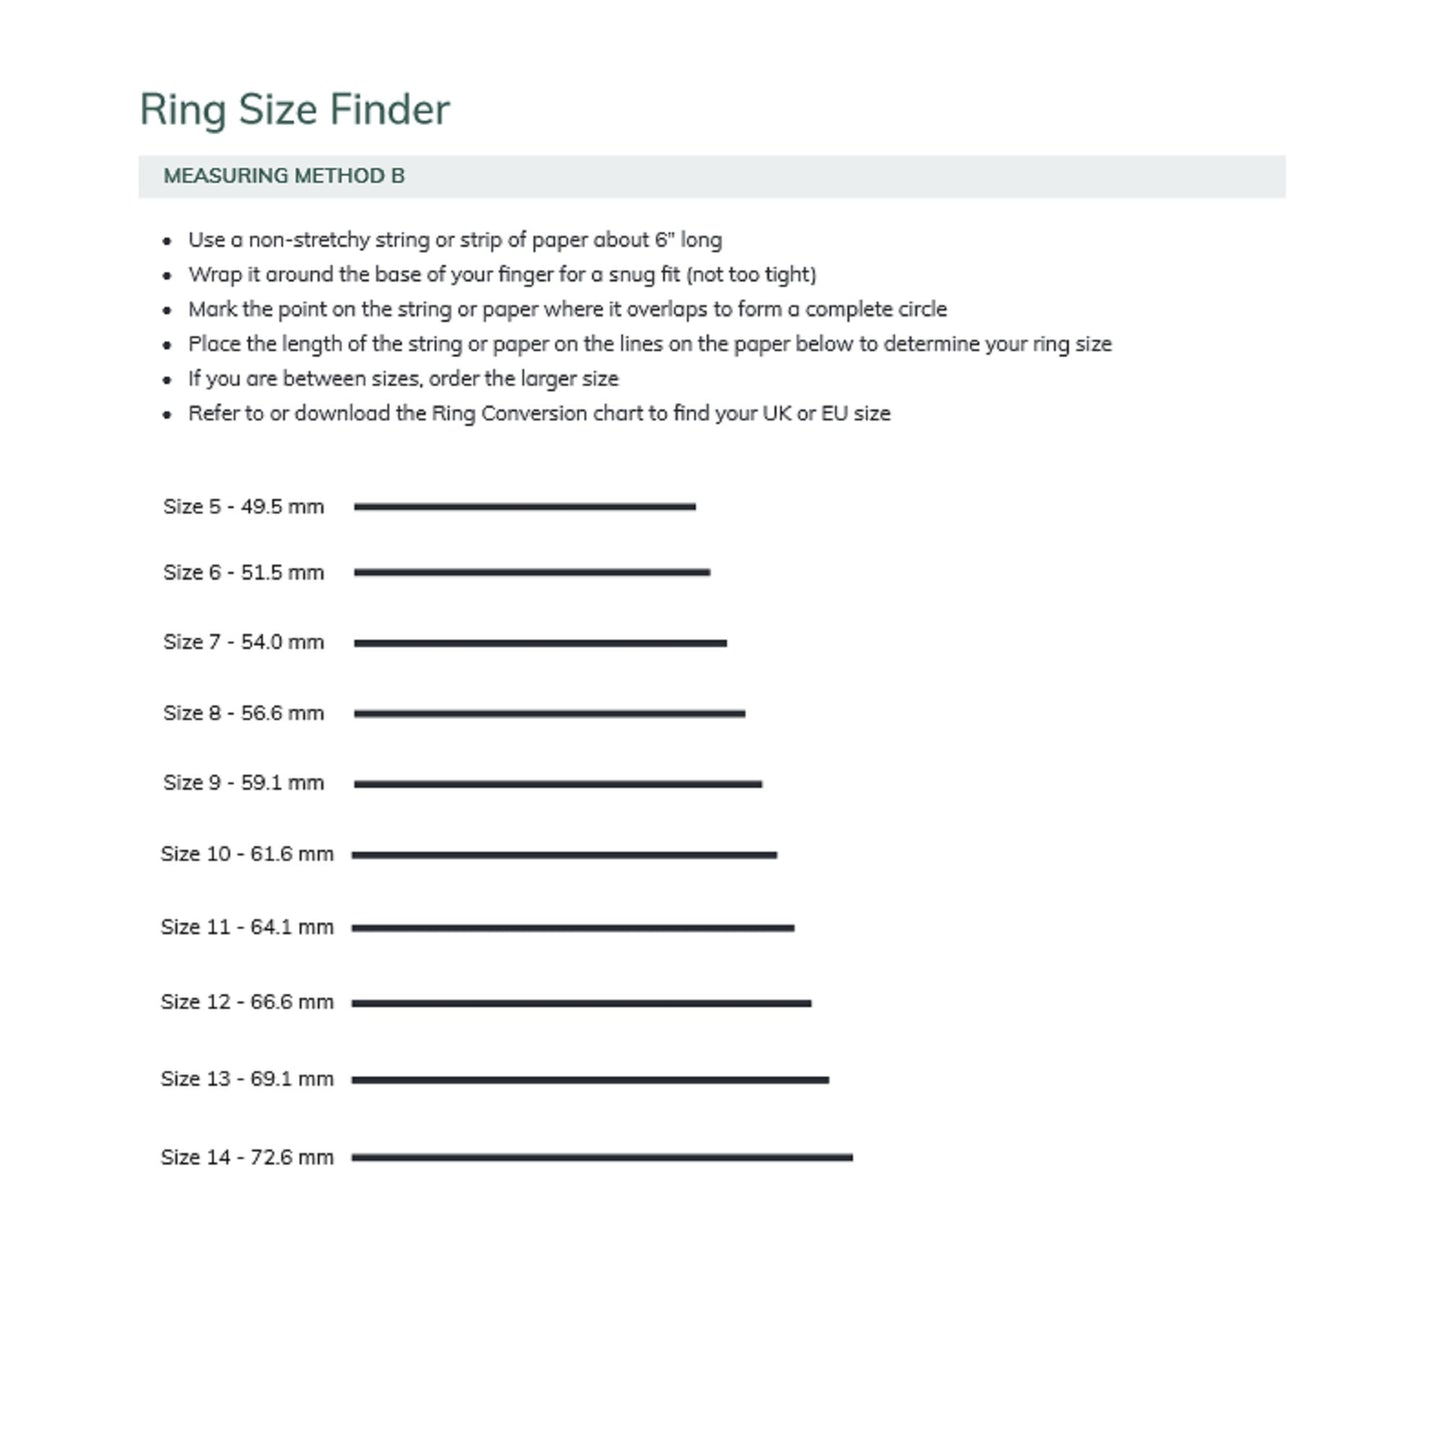 Printable Ring Sizer Chart - Find Your Ring Size Instantly with our Reusable Plastic Ring Sizing Tool - Download Now on Etsy!